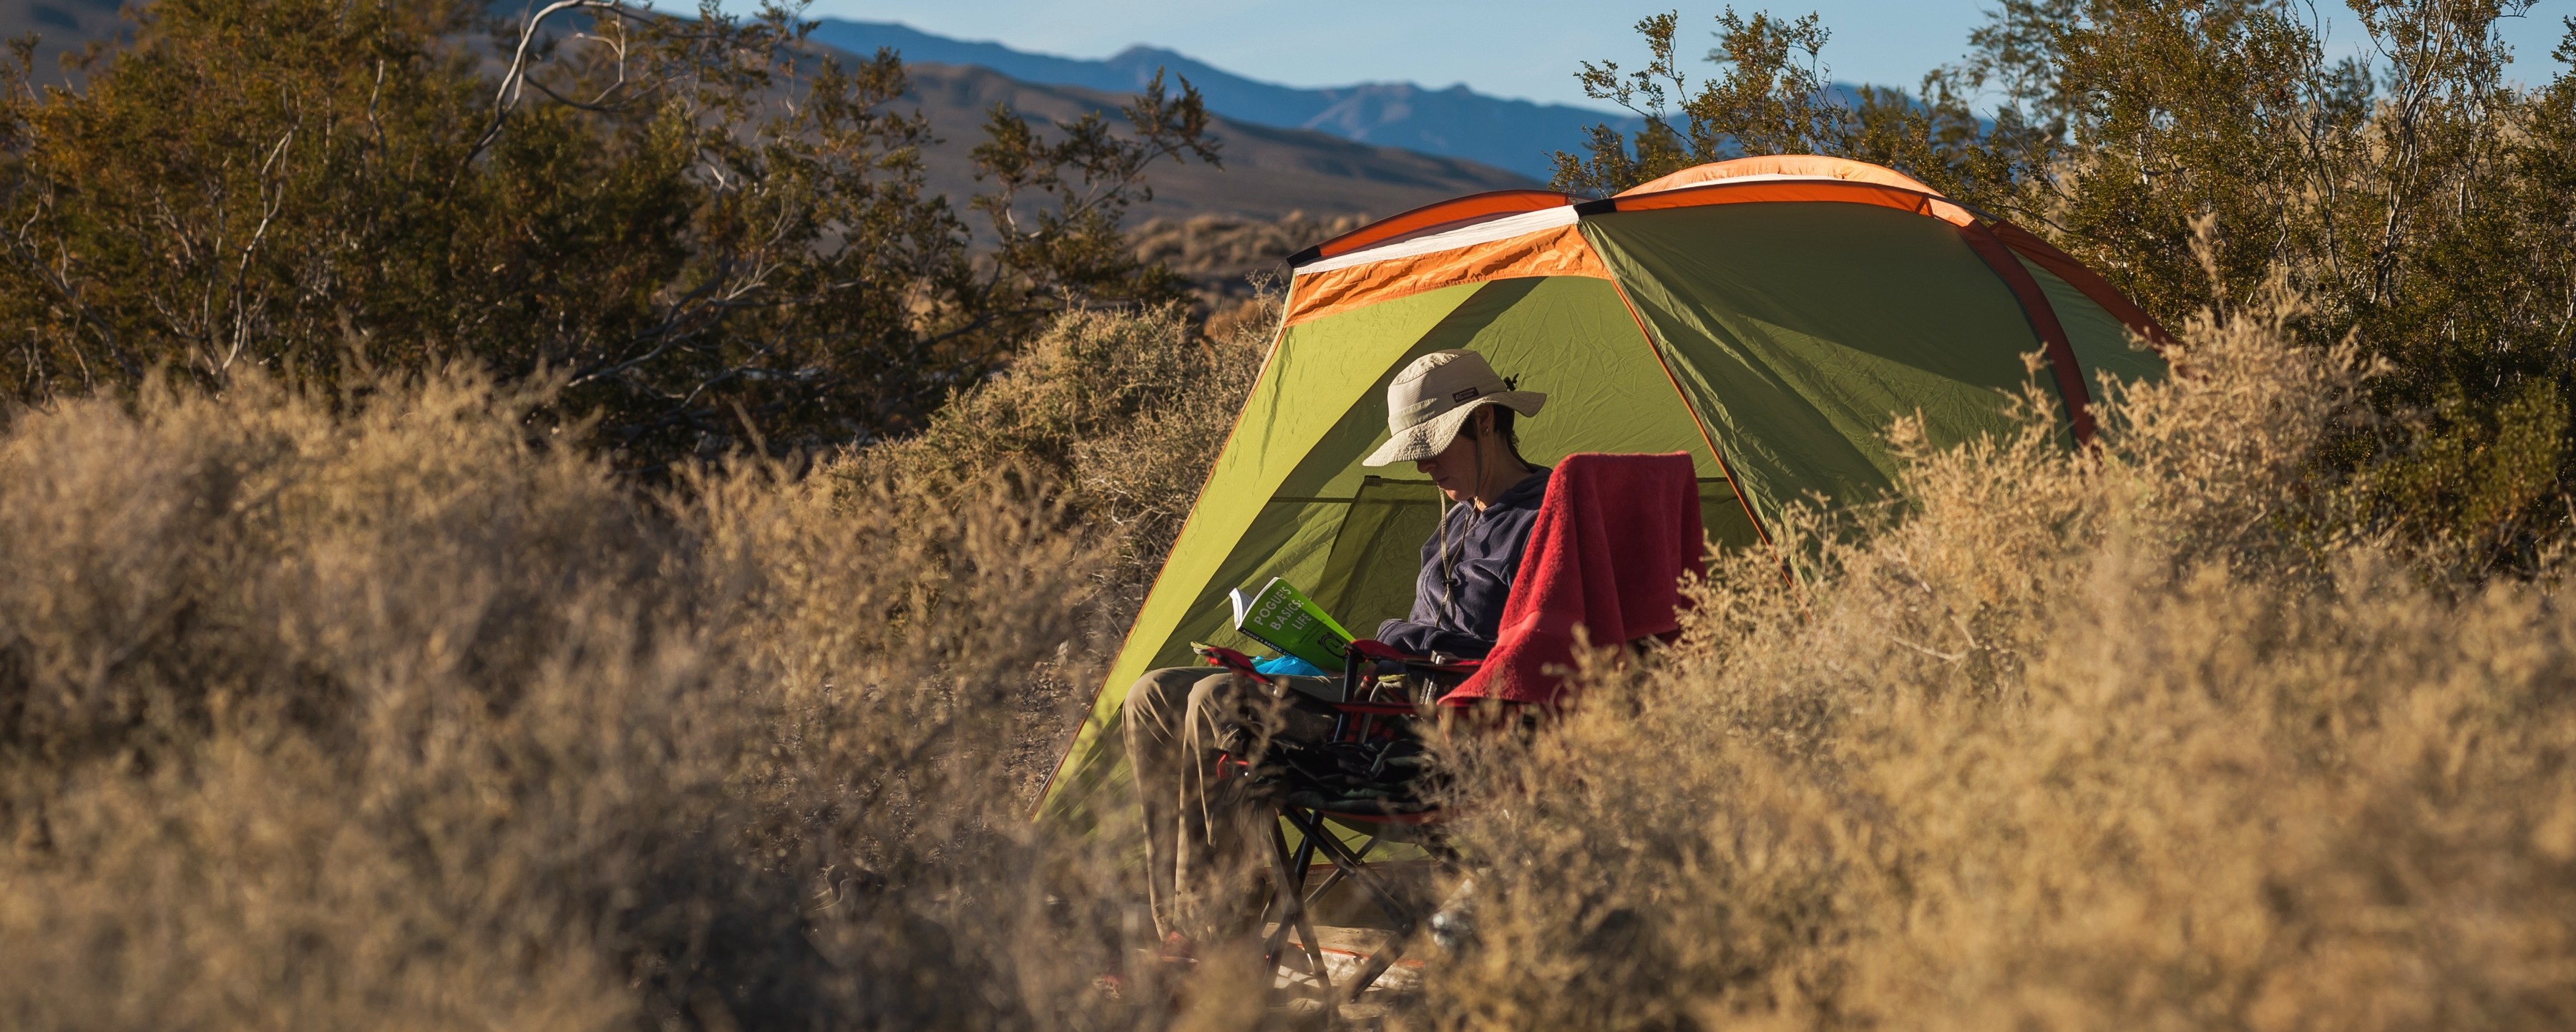 A camper in a bucket hat sits next to a green tent reading a book. The campsite is among green and brown brush.